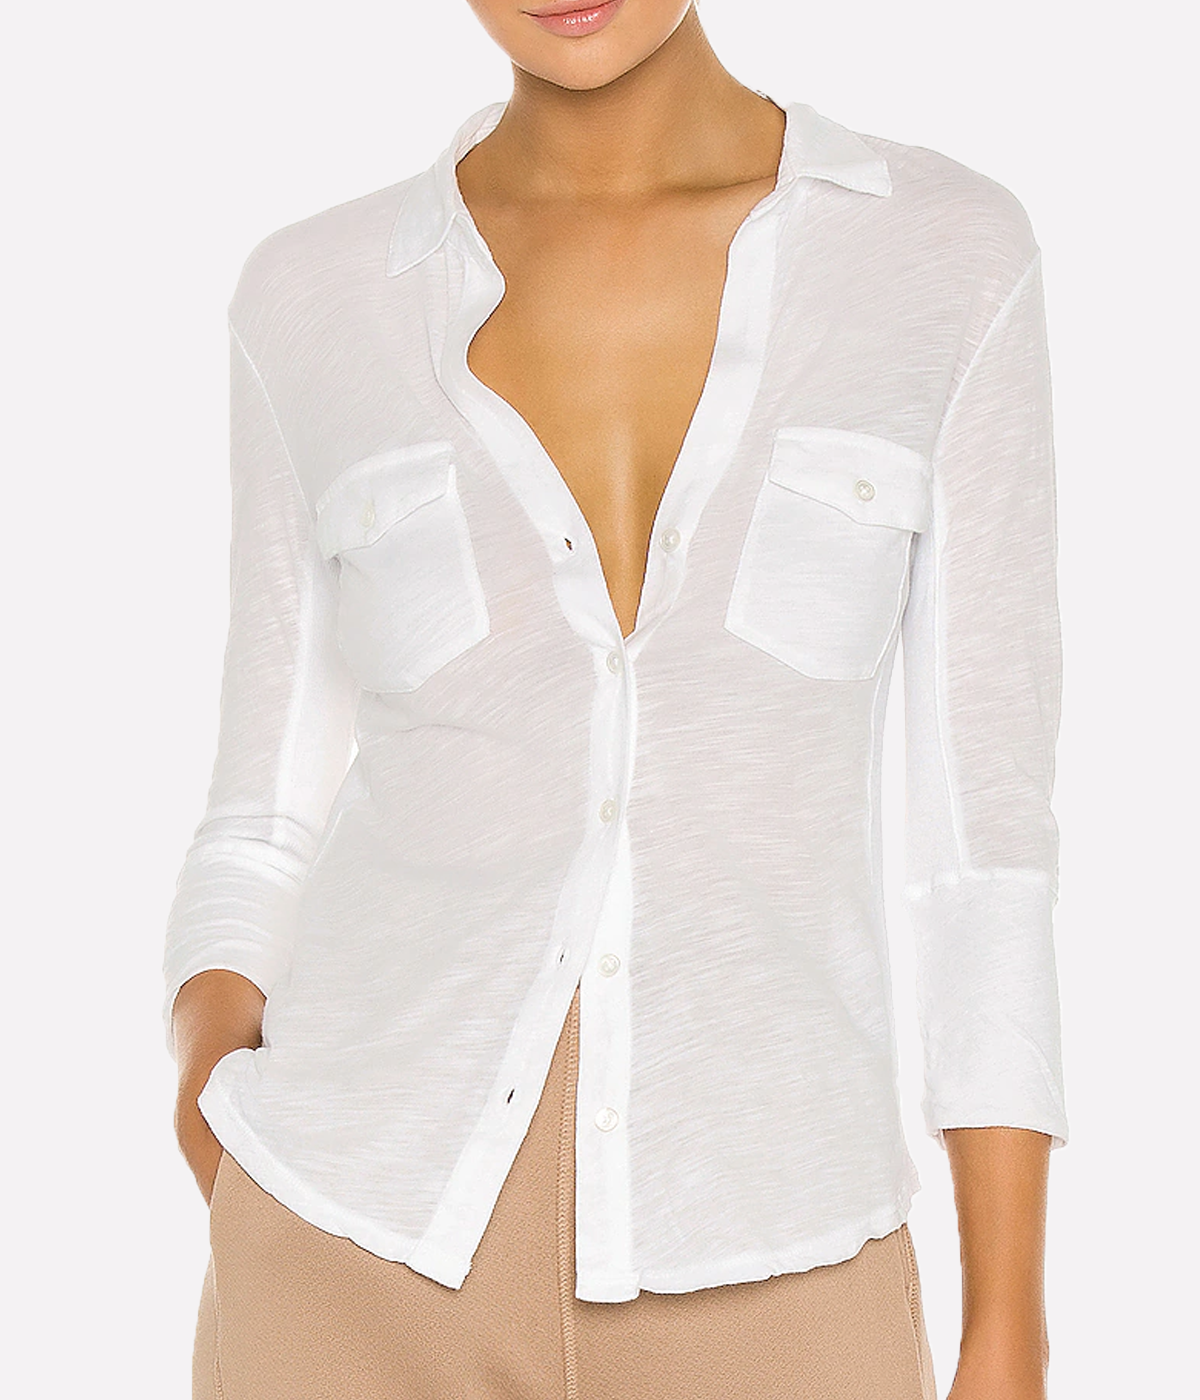 Contrast Panel Shirt in White